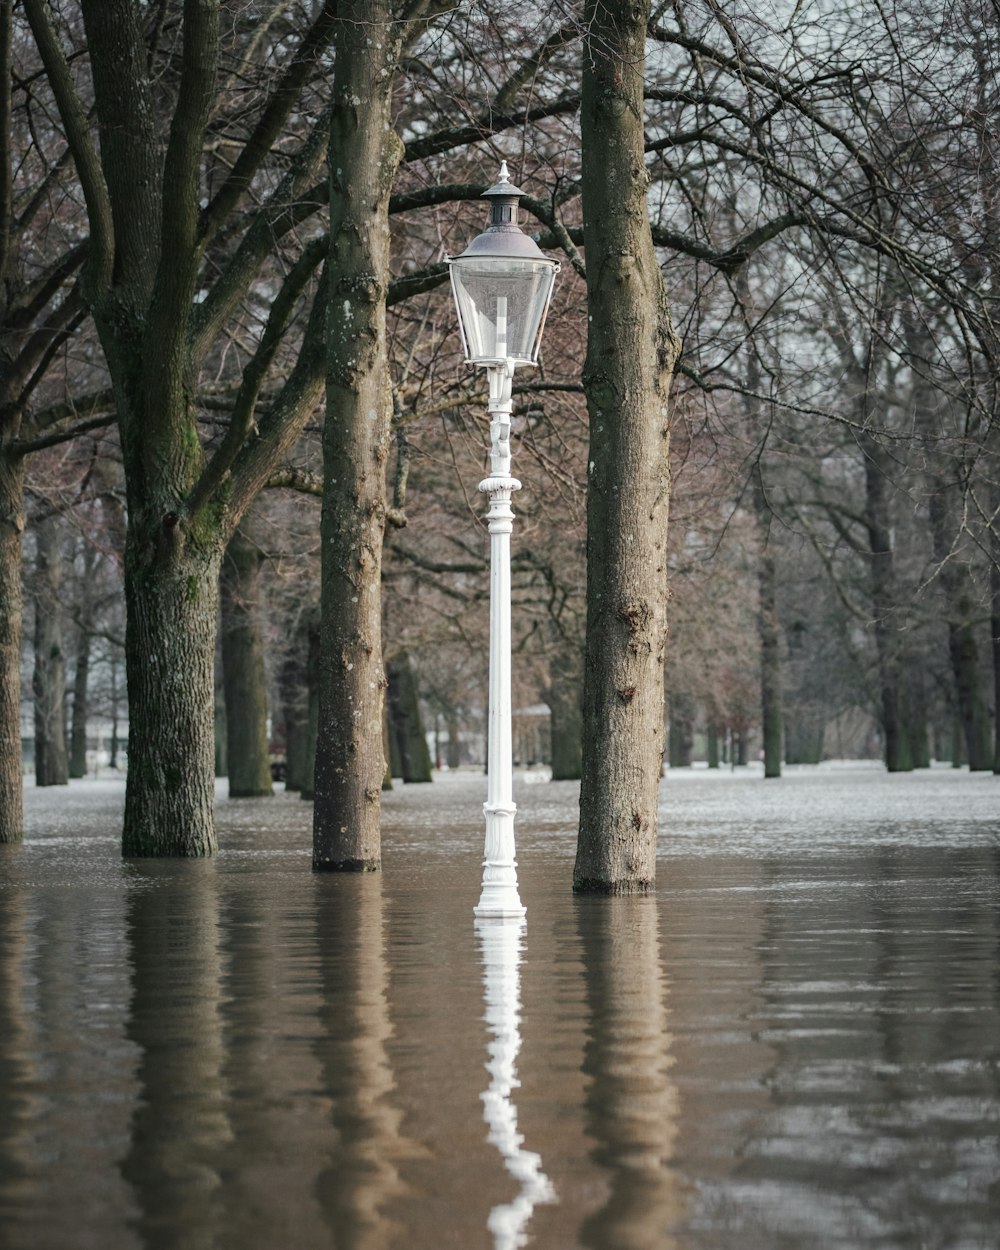 a street light surrounded by water and trees